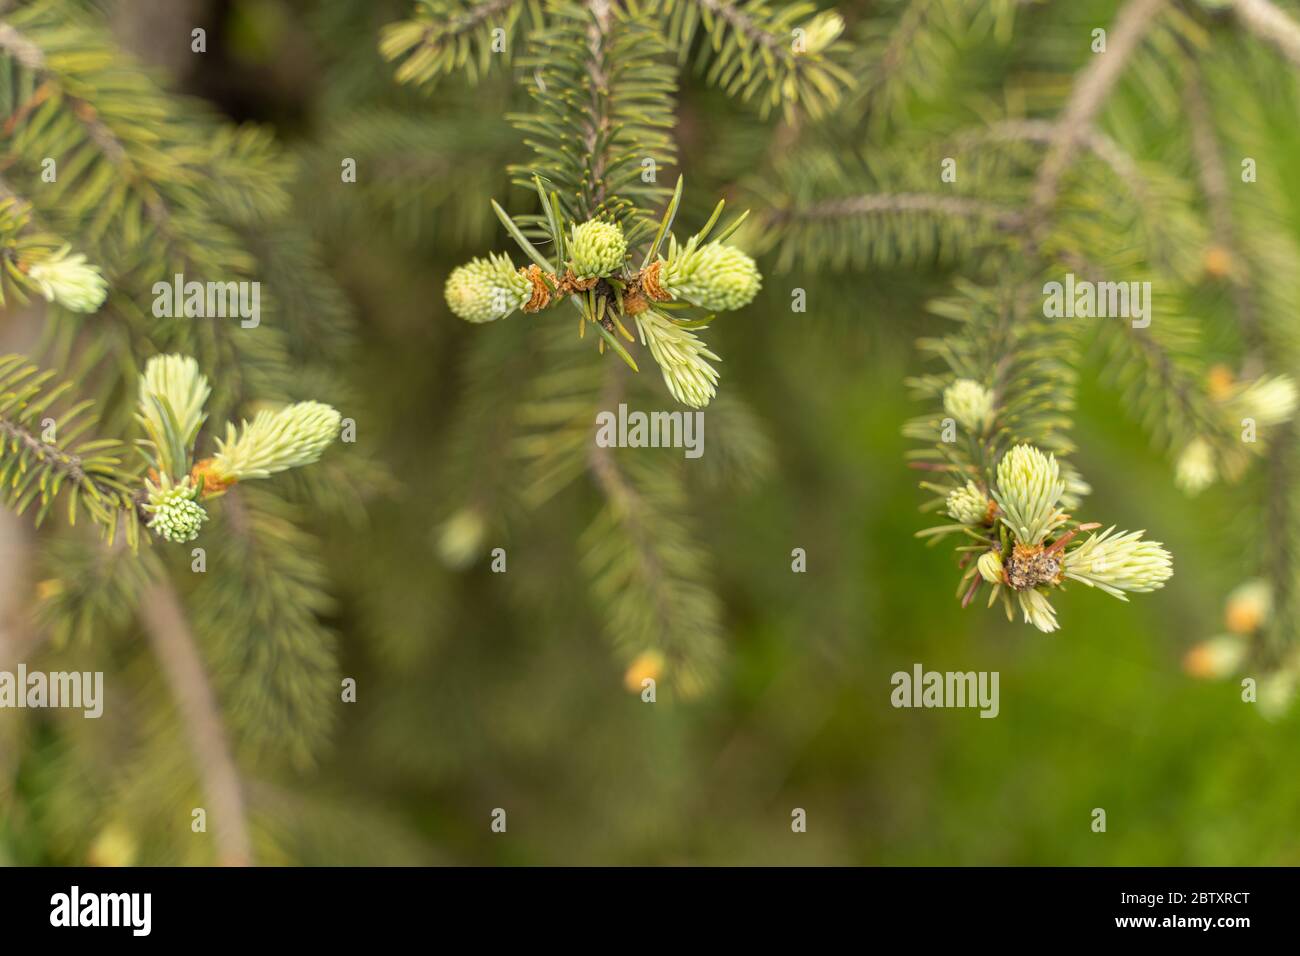 sprig of spruce with young shoots on a blurred background Stock Photo